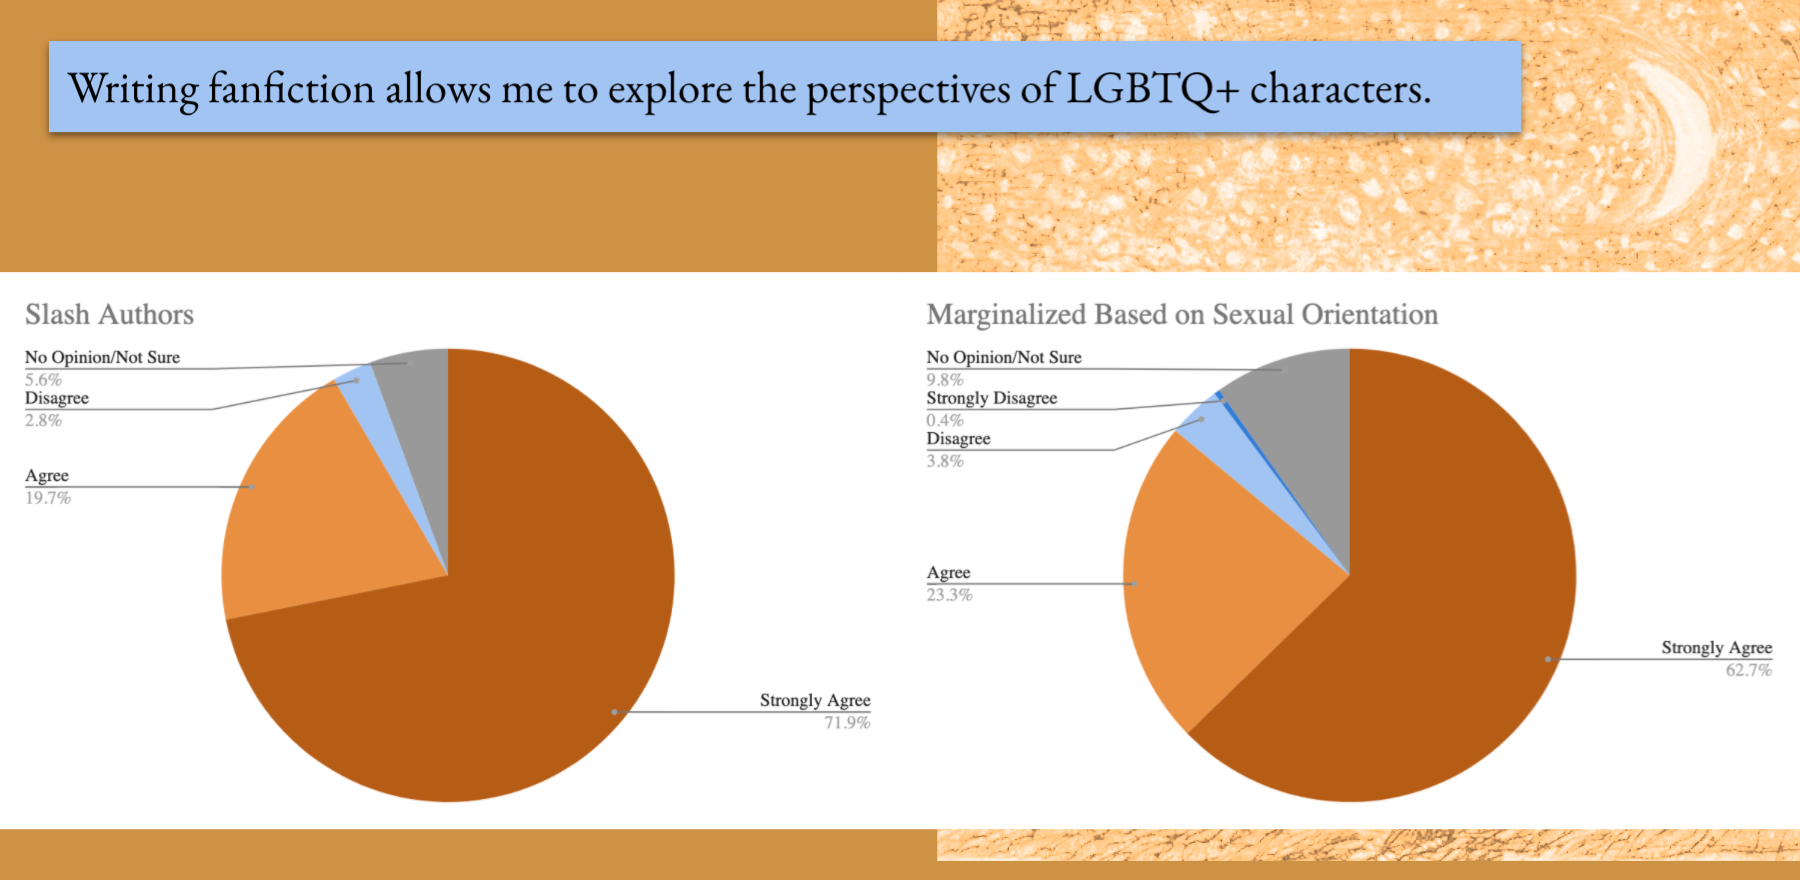 Slash authors and authors marginalized based on their sexual orientation almost all agree that they use fanfic to explore the perspectives of LGBTQ characters